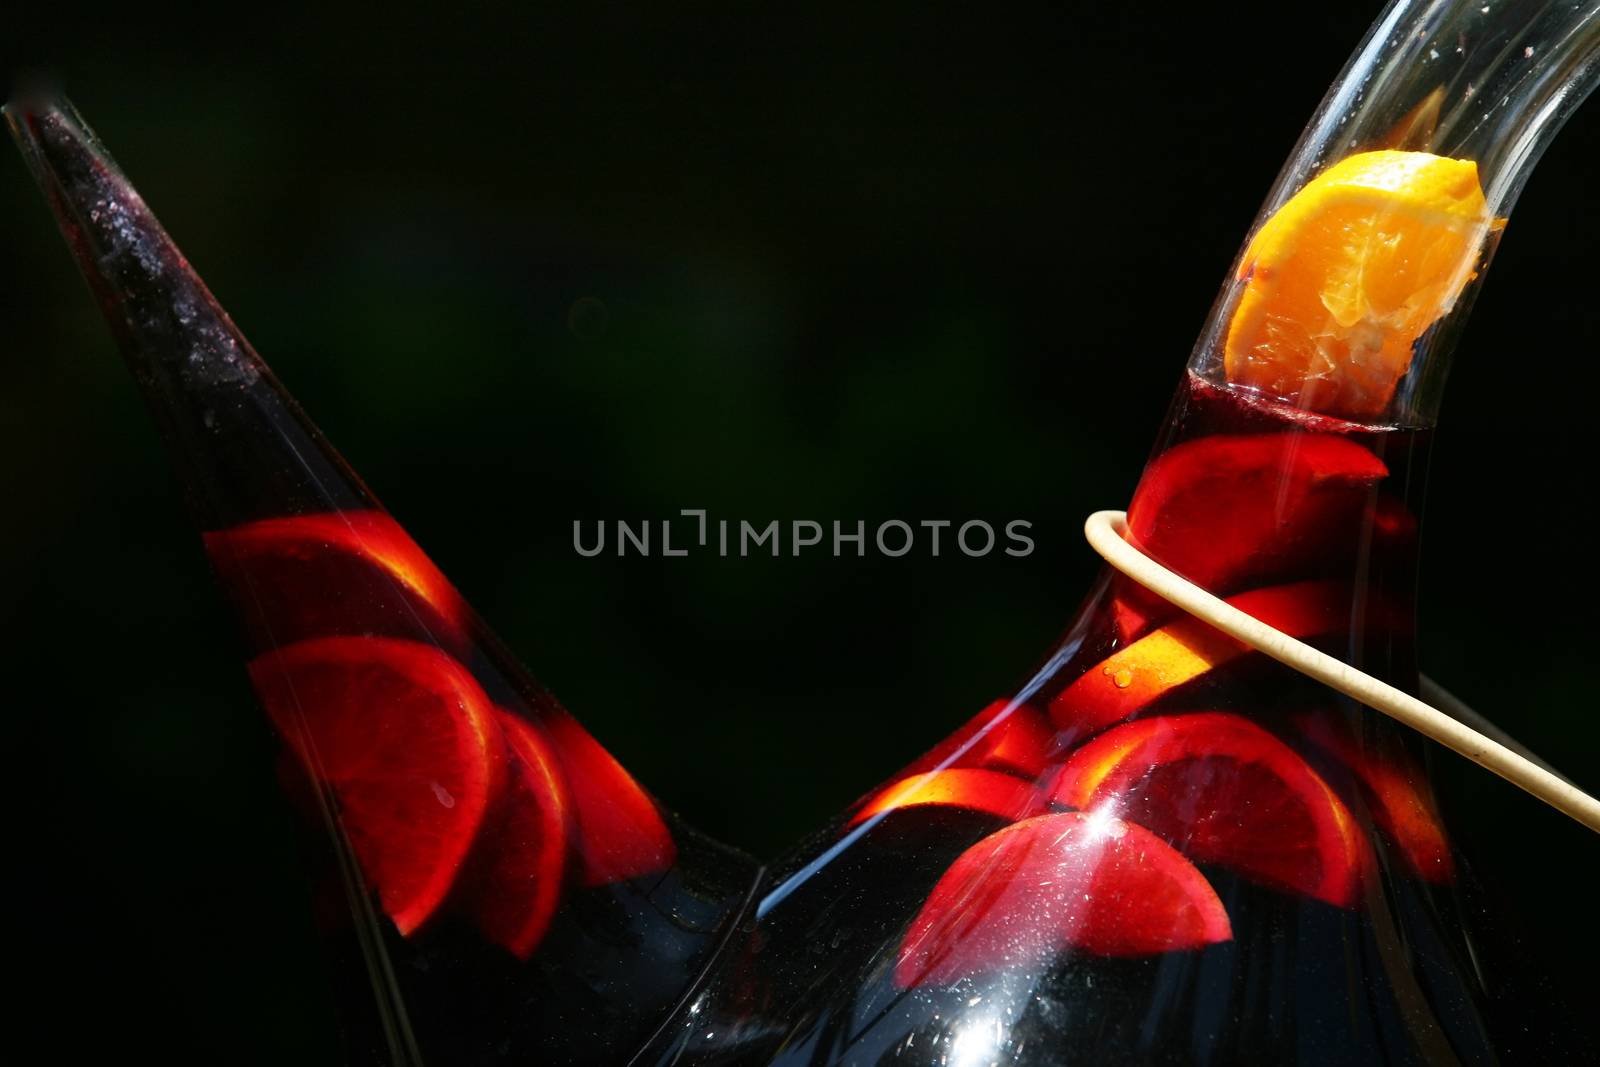 Jugs of sangria on a black background